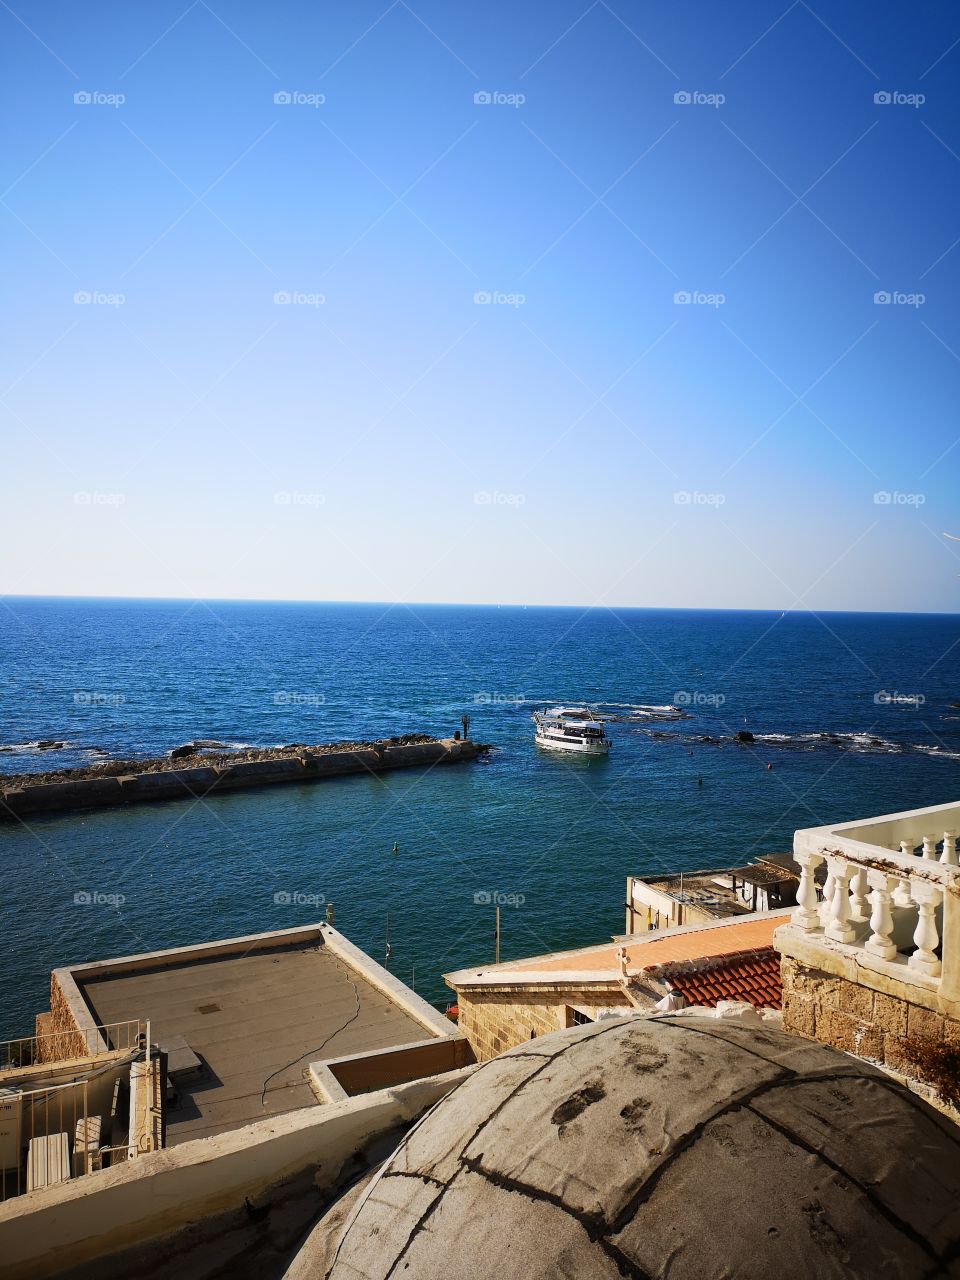 A pleasure boat enters the port of Jaffa past the Andromeda cliff